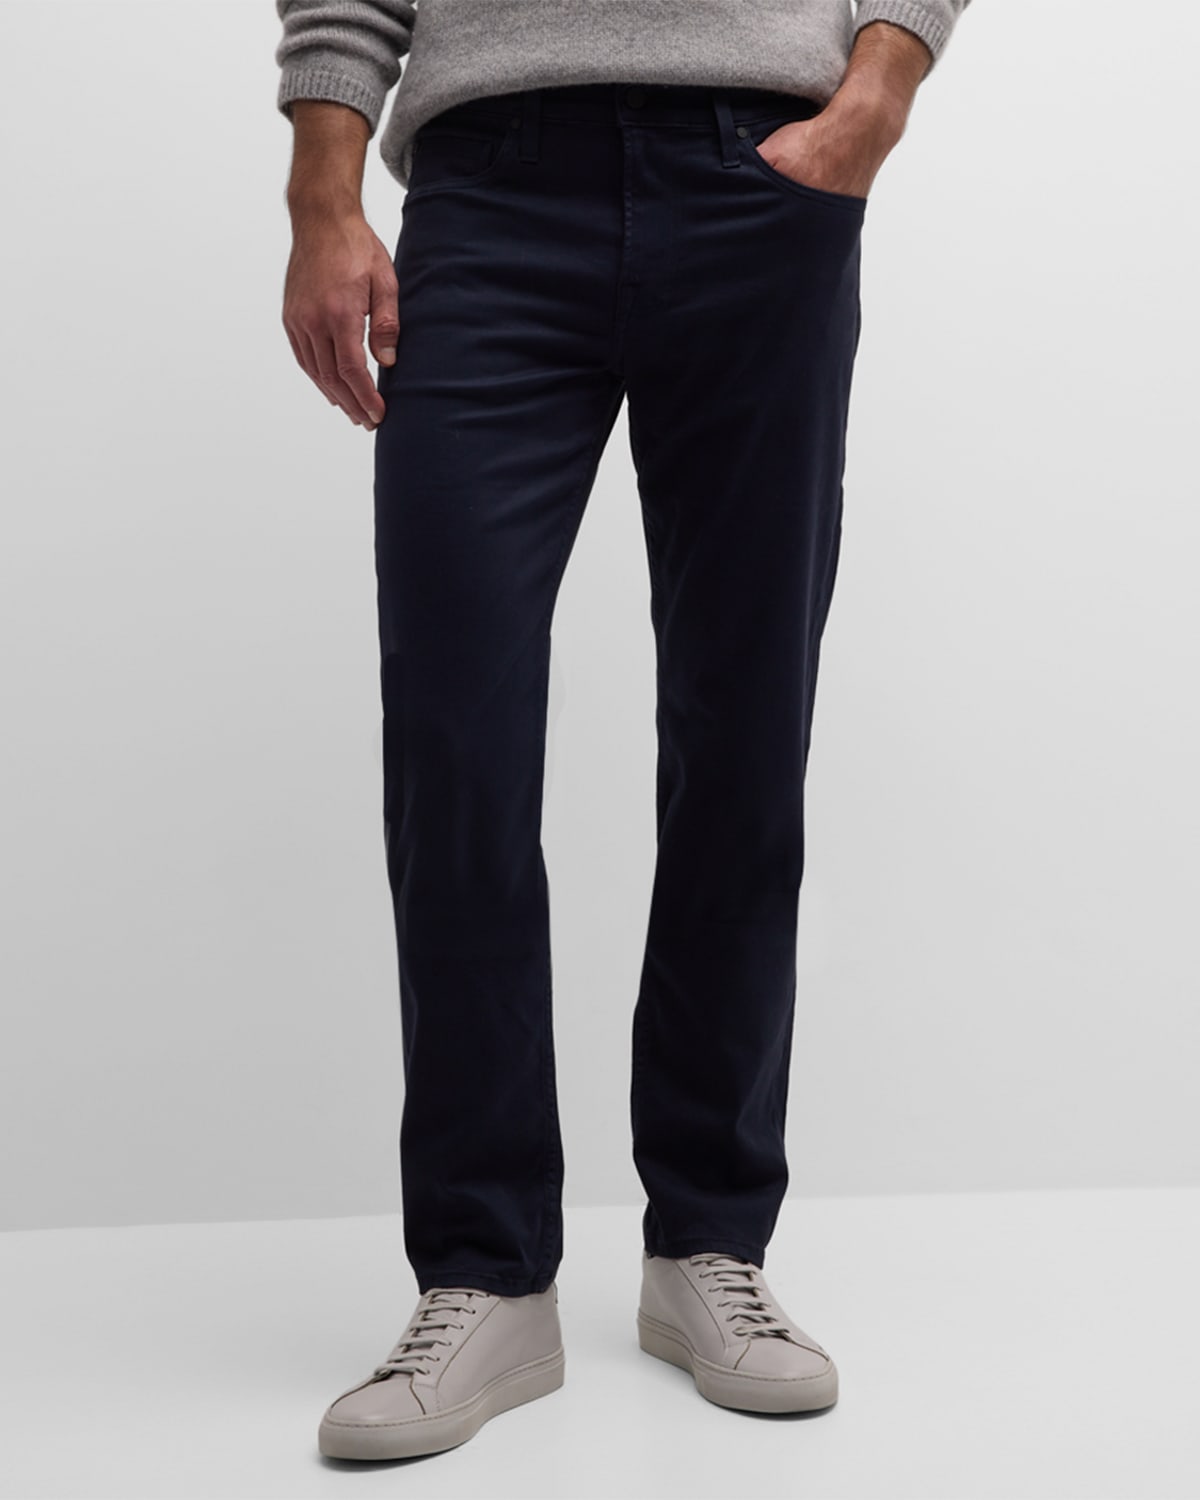 7 For All Mankind Men's Slimmy Luxe Performance Plus Jeans